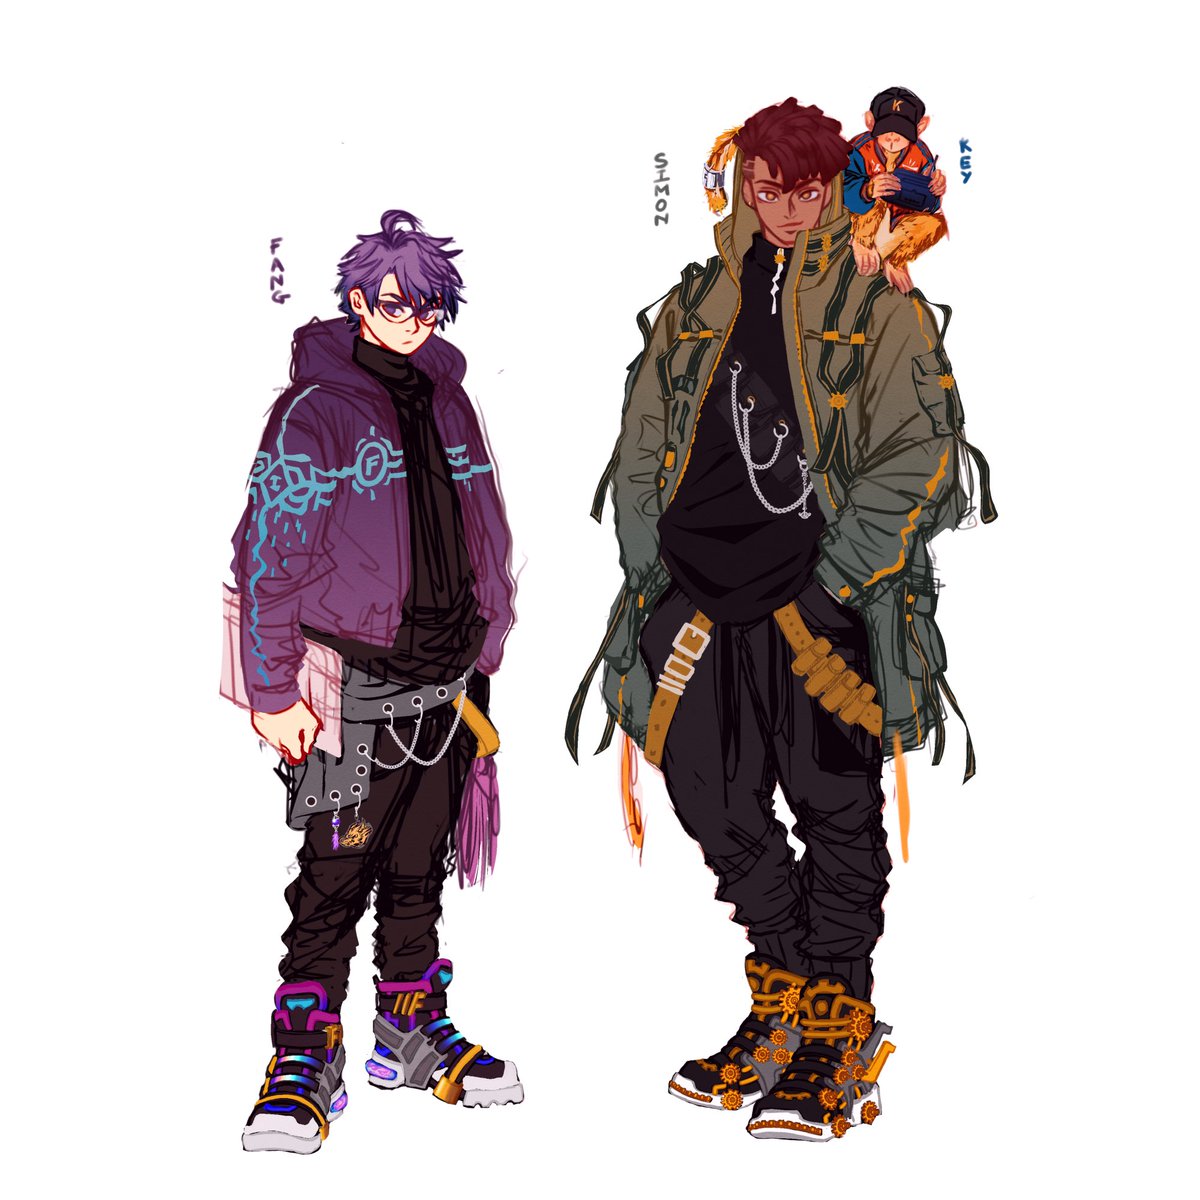 ⛓️
.
Fang and an OC